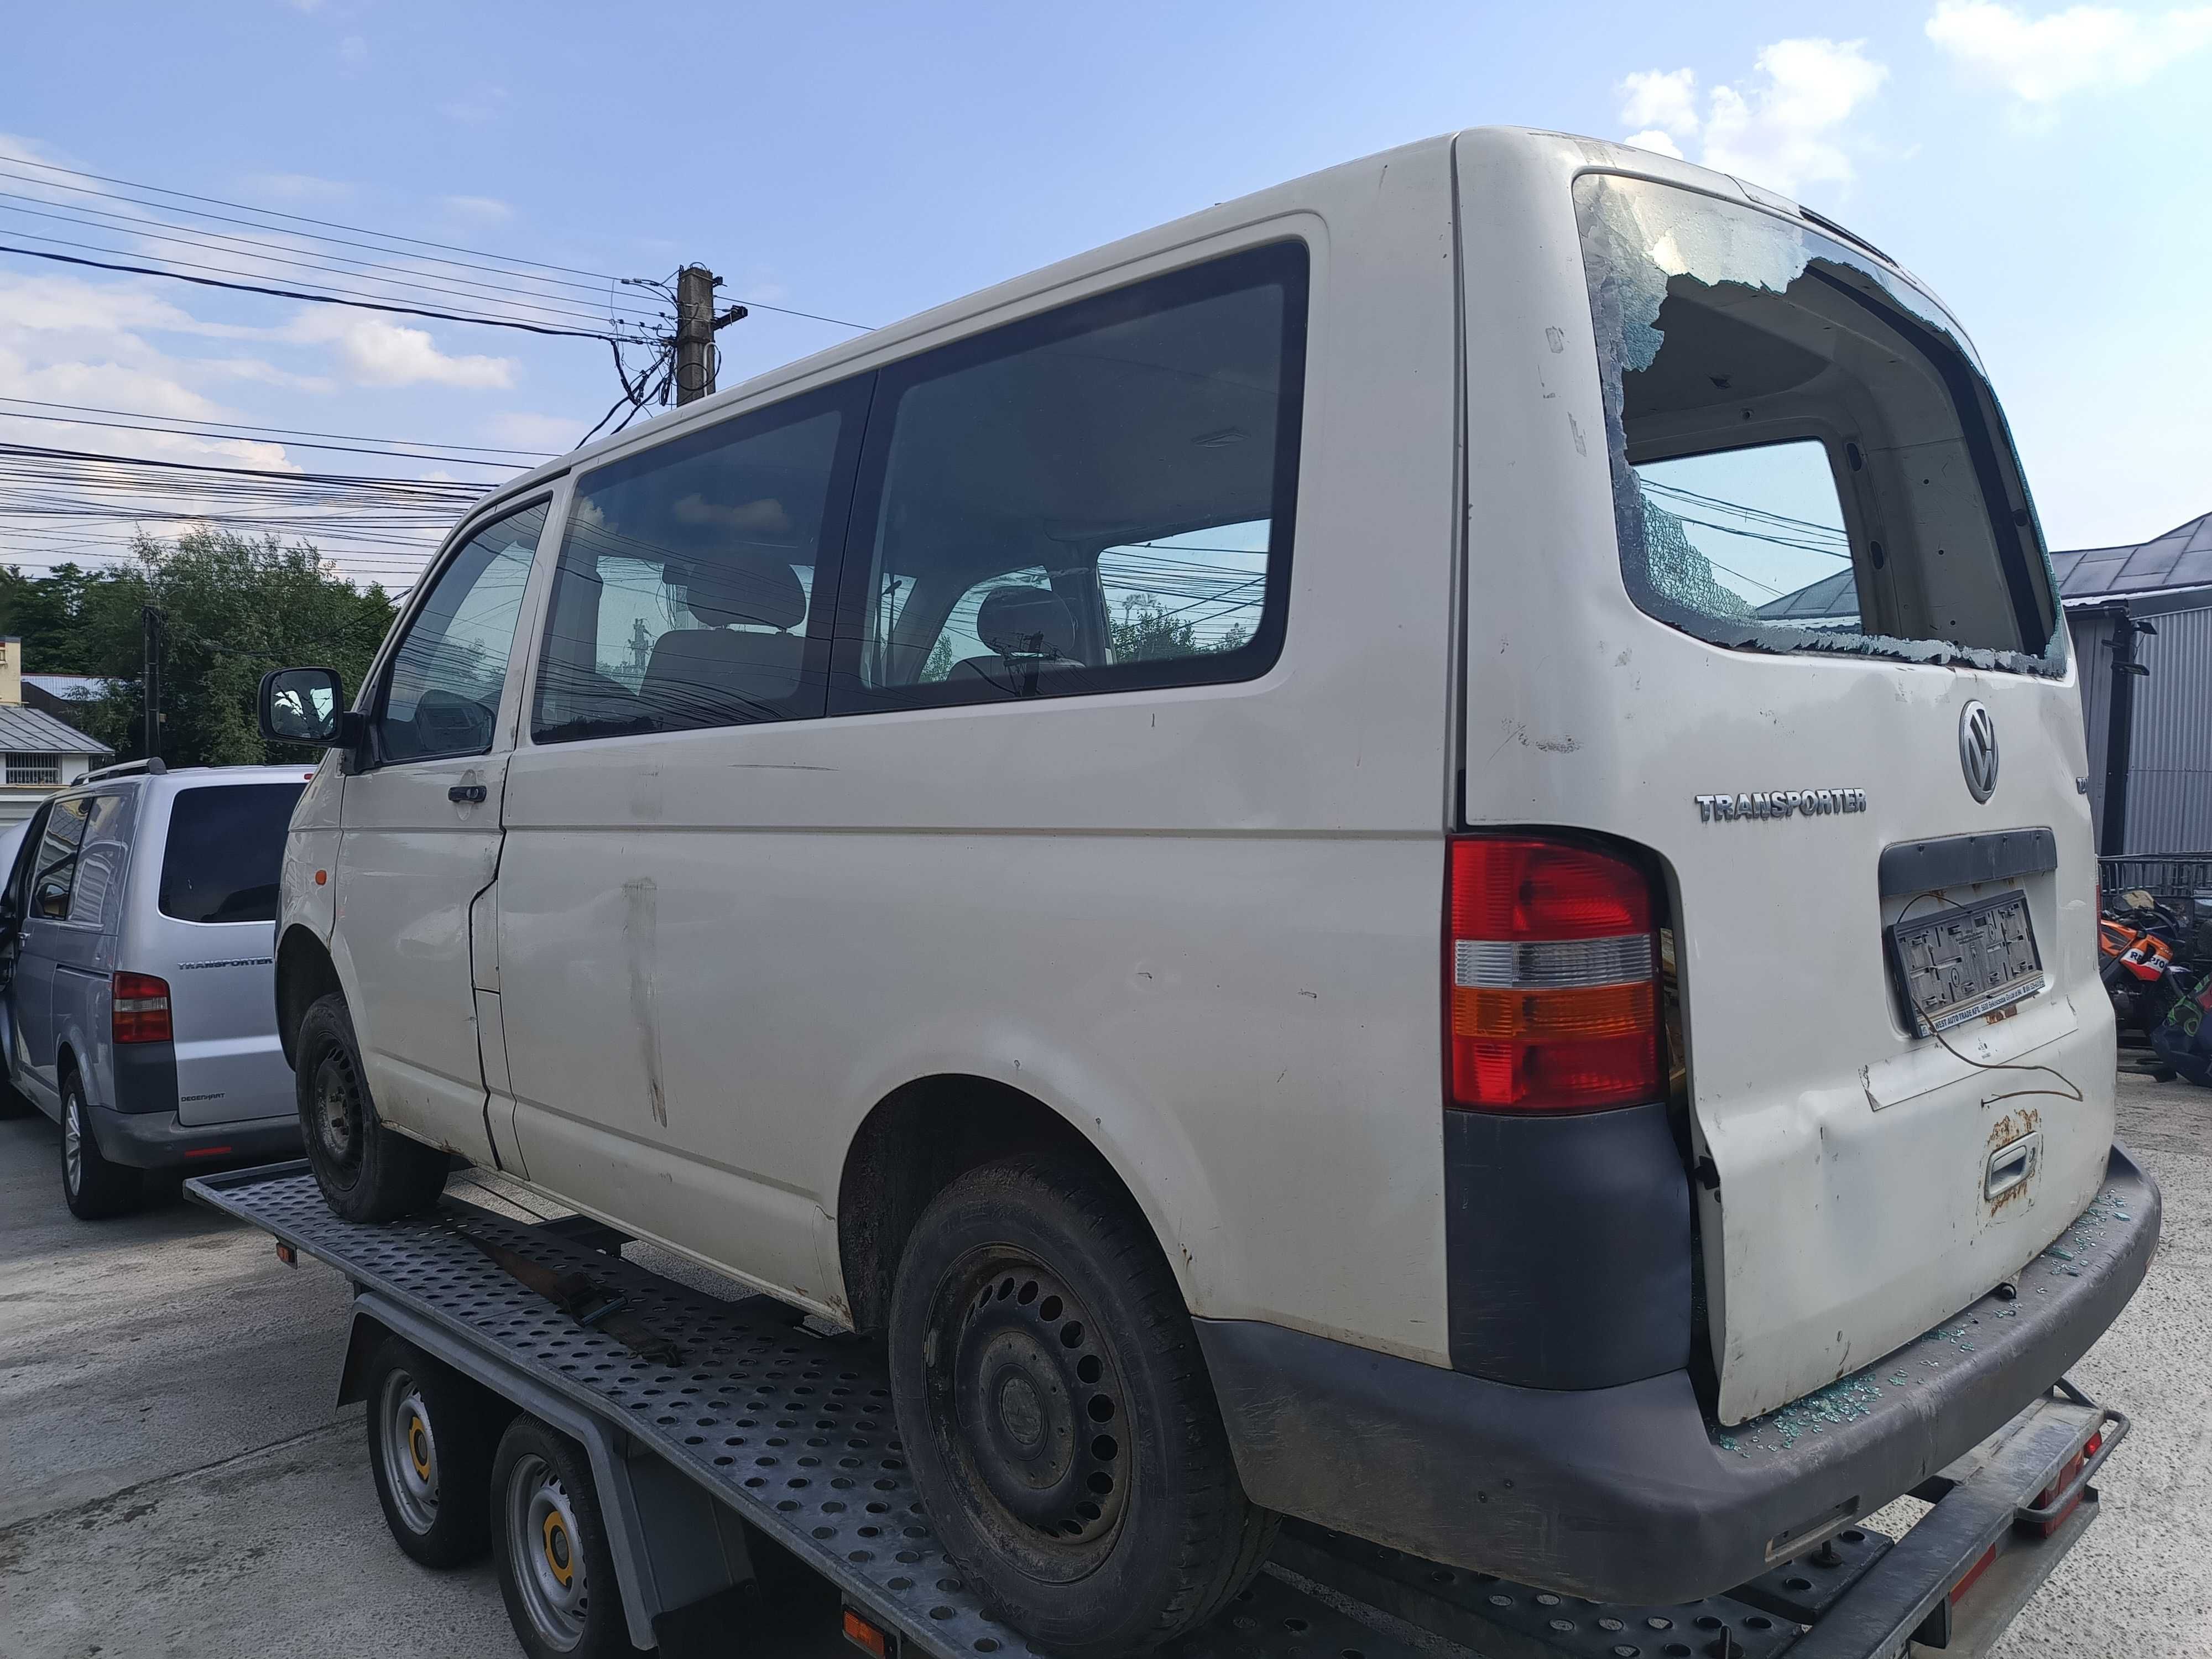 Geam Lateral Stanga Spate VW Transporter T5